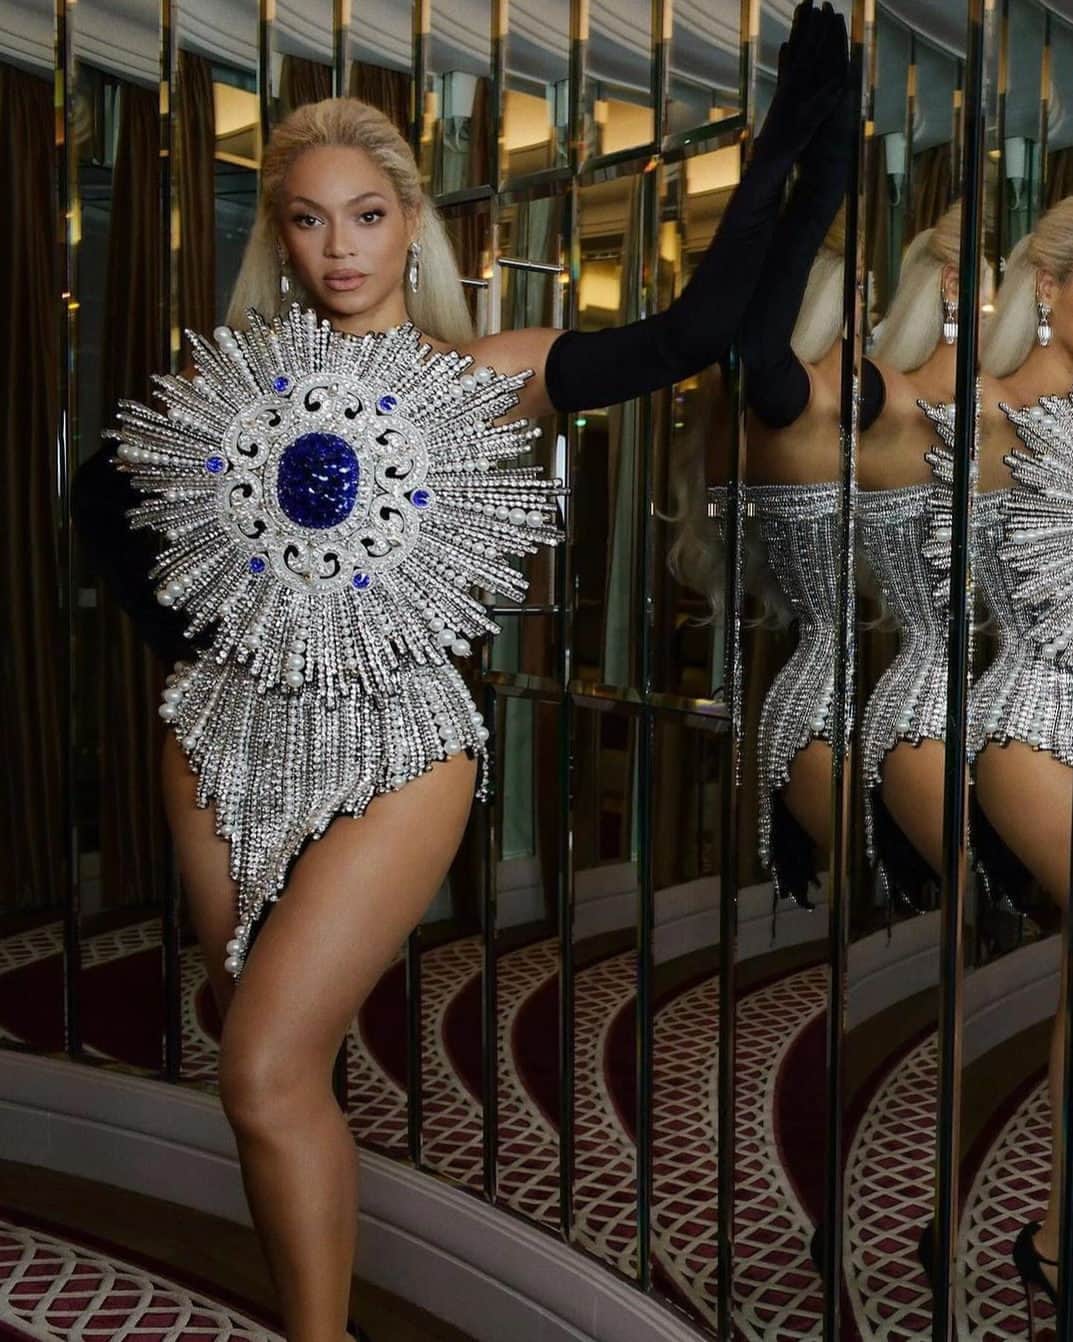 Vogueのインスタグラム：「While @Beyonce was the first person to wear Thom Browne couture for “Renaissance: A Film by Beyoncé”’s London debut last night, for the after party, she stepped out in a look that probably had most thinking, “it should cost a billion to look this good.” The star wore an enormous, jewel-like dress taken straight from @Balmain’s pre-fall 2023 collection. Tap the link in bio to see more.」